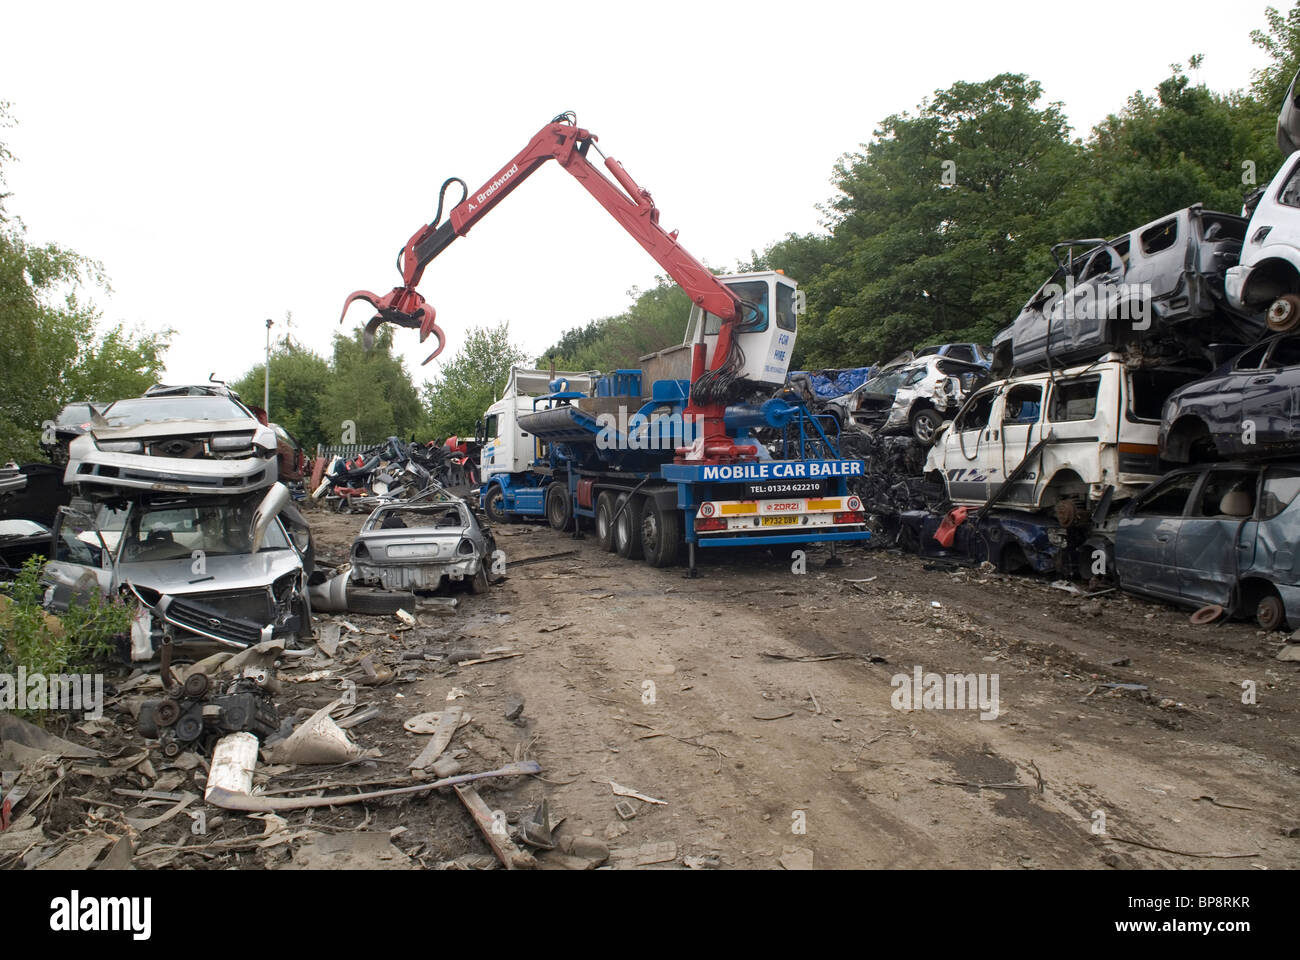 Cars being recycled in a scrapyard Stock Photo